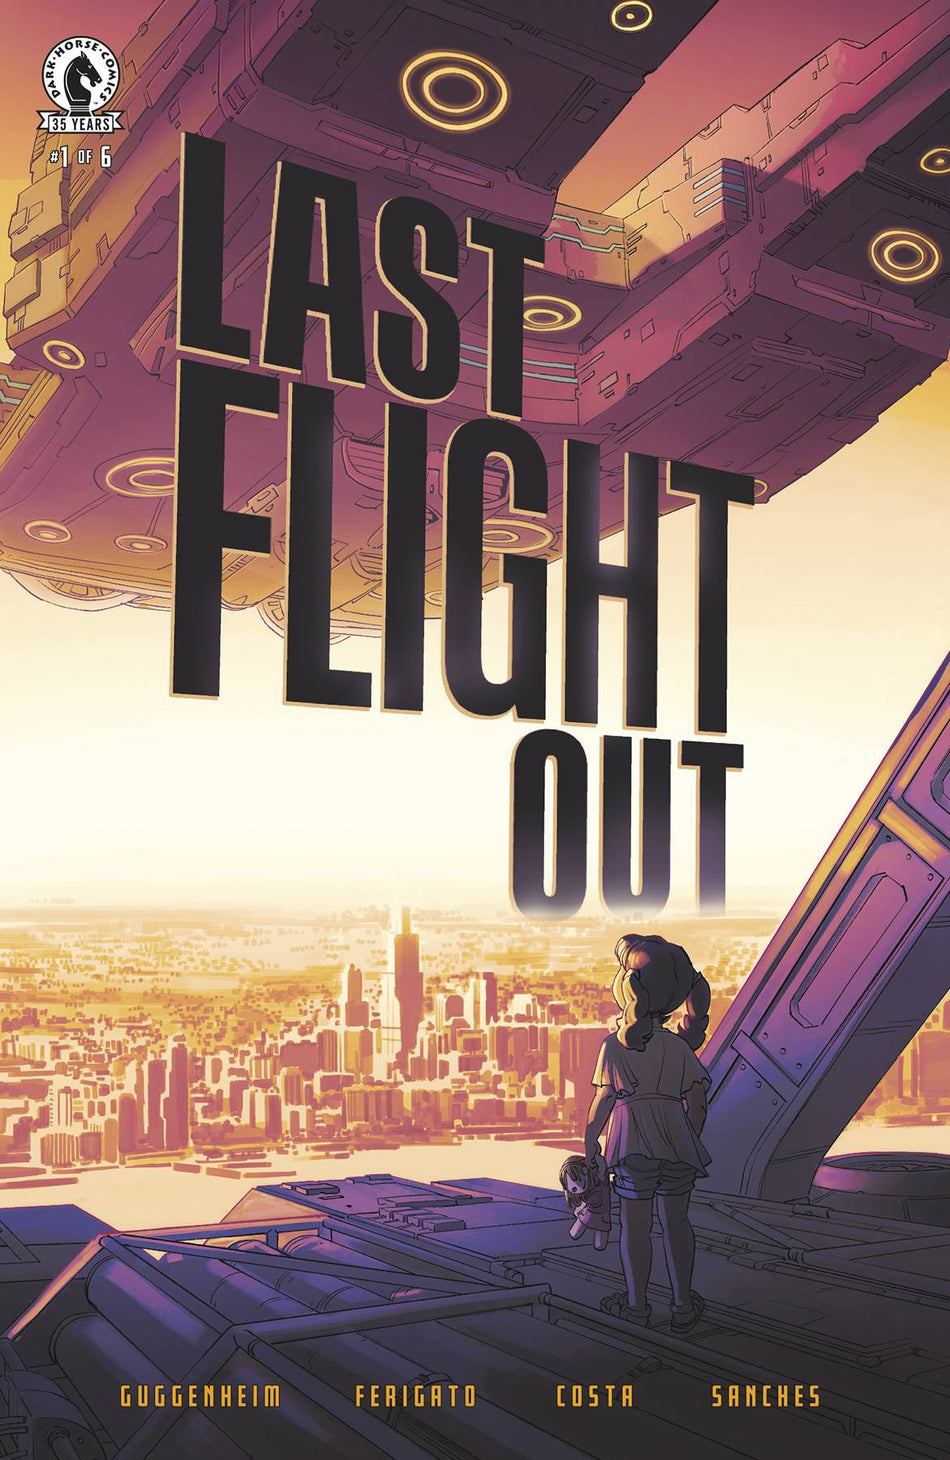 Photo of Last Flight Out Issue 1 (of 6) comic sold by Stronghold Collectibles